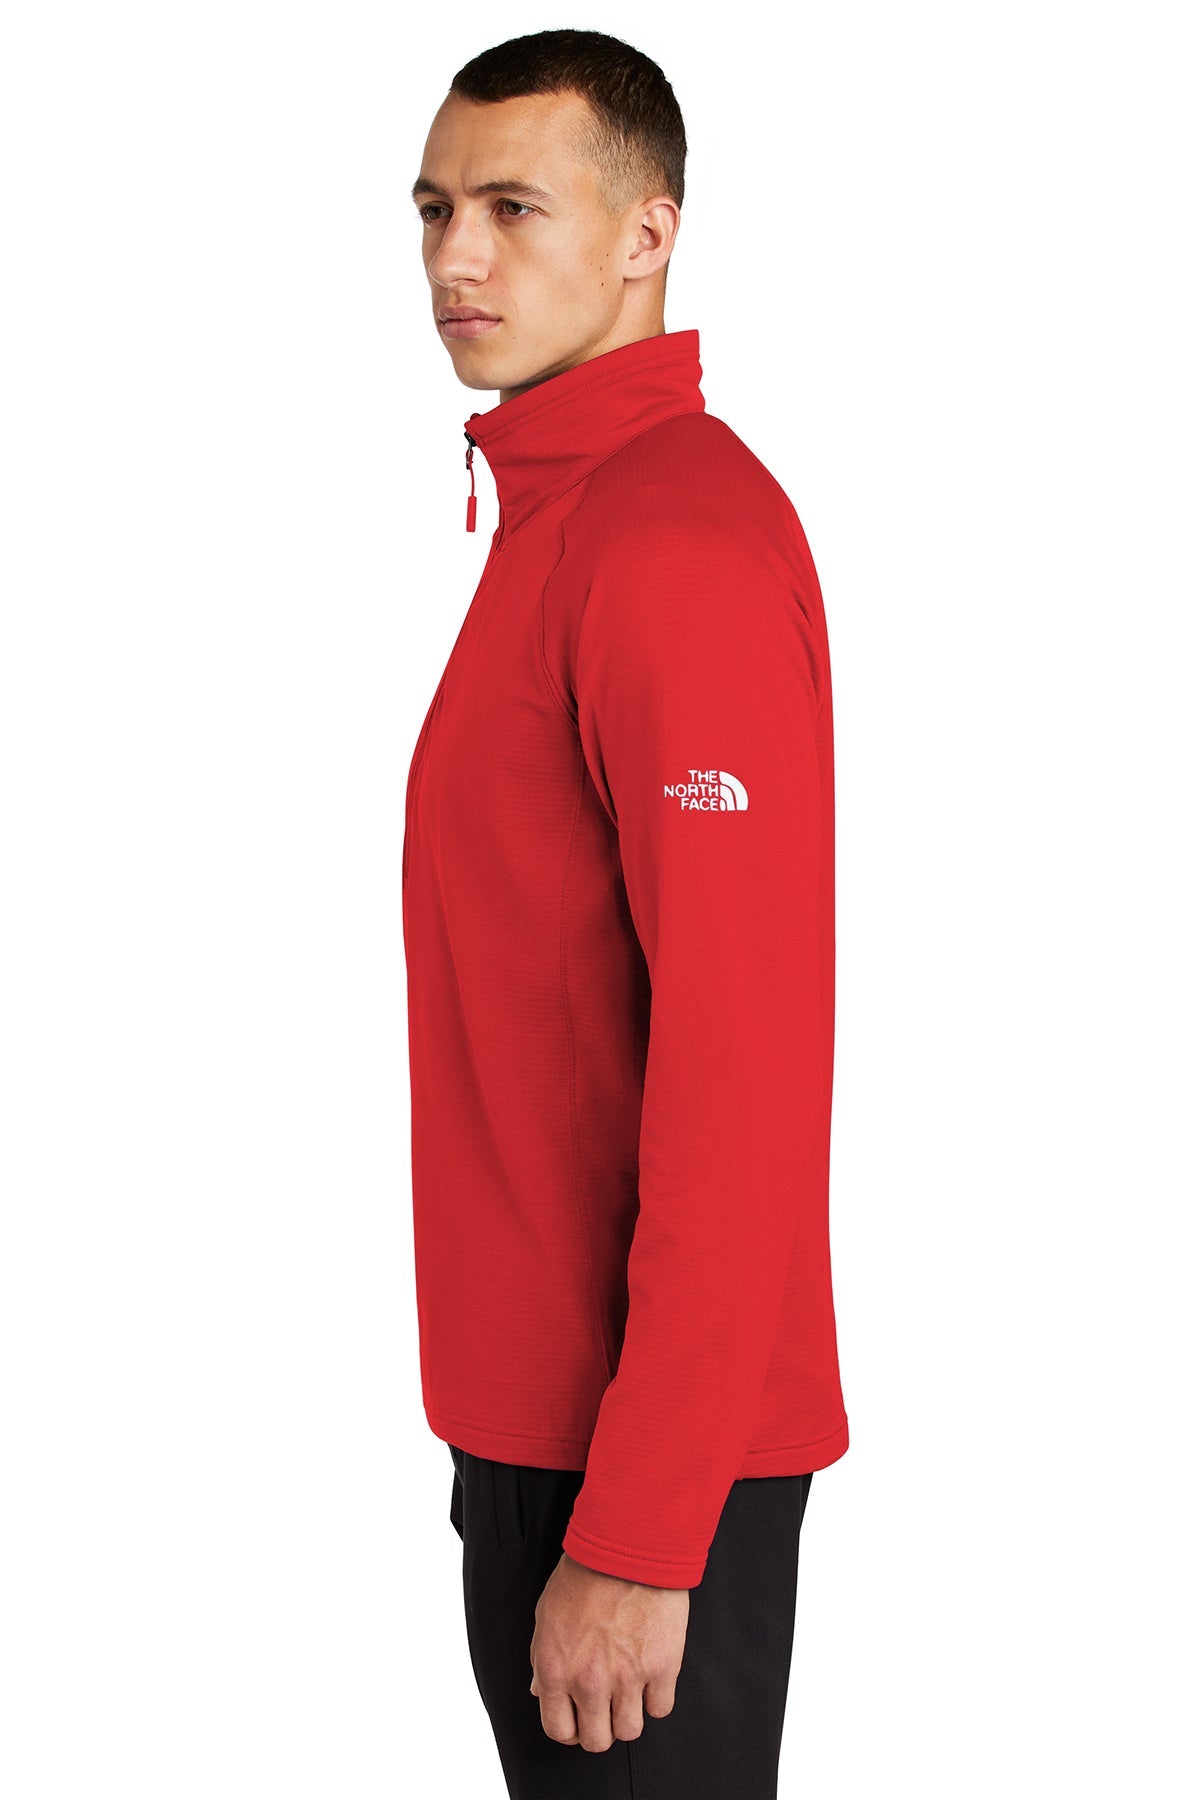 the north face_nf0a47fb _tnf red_company_logo_sweatshirts